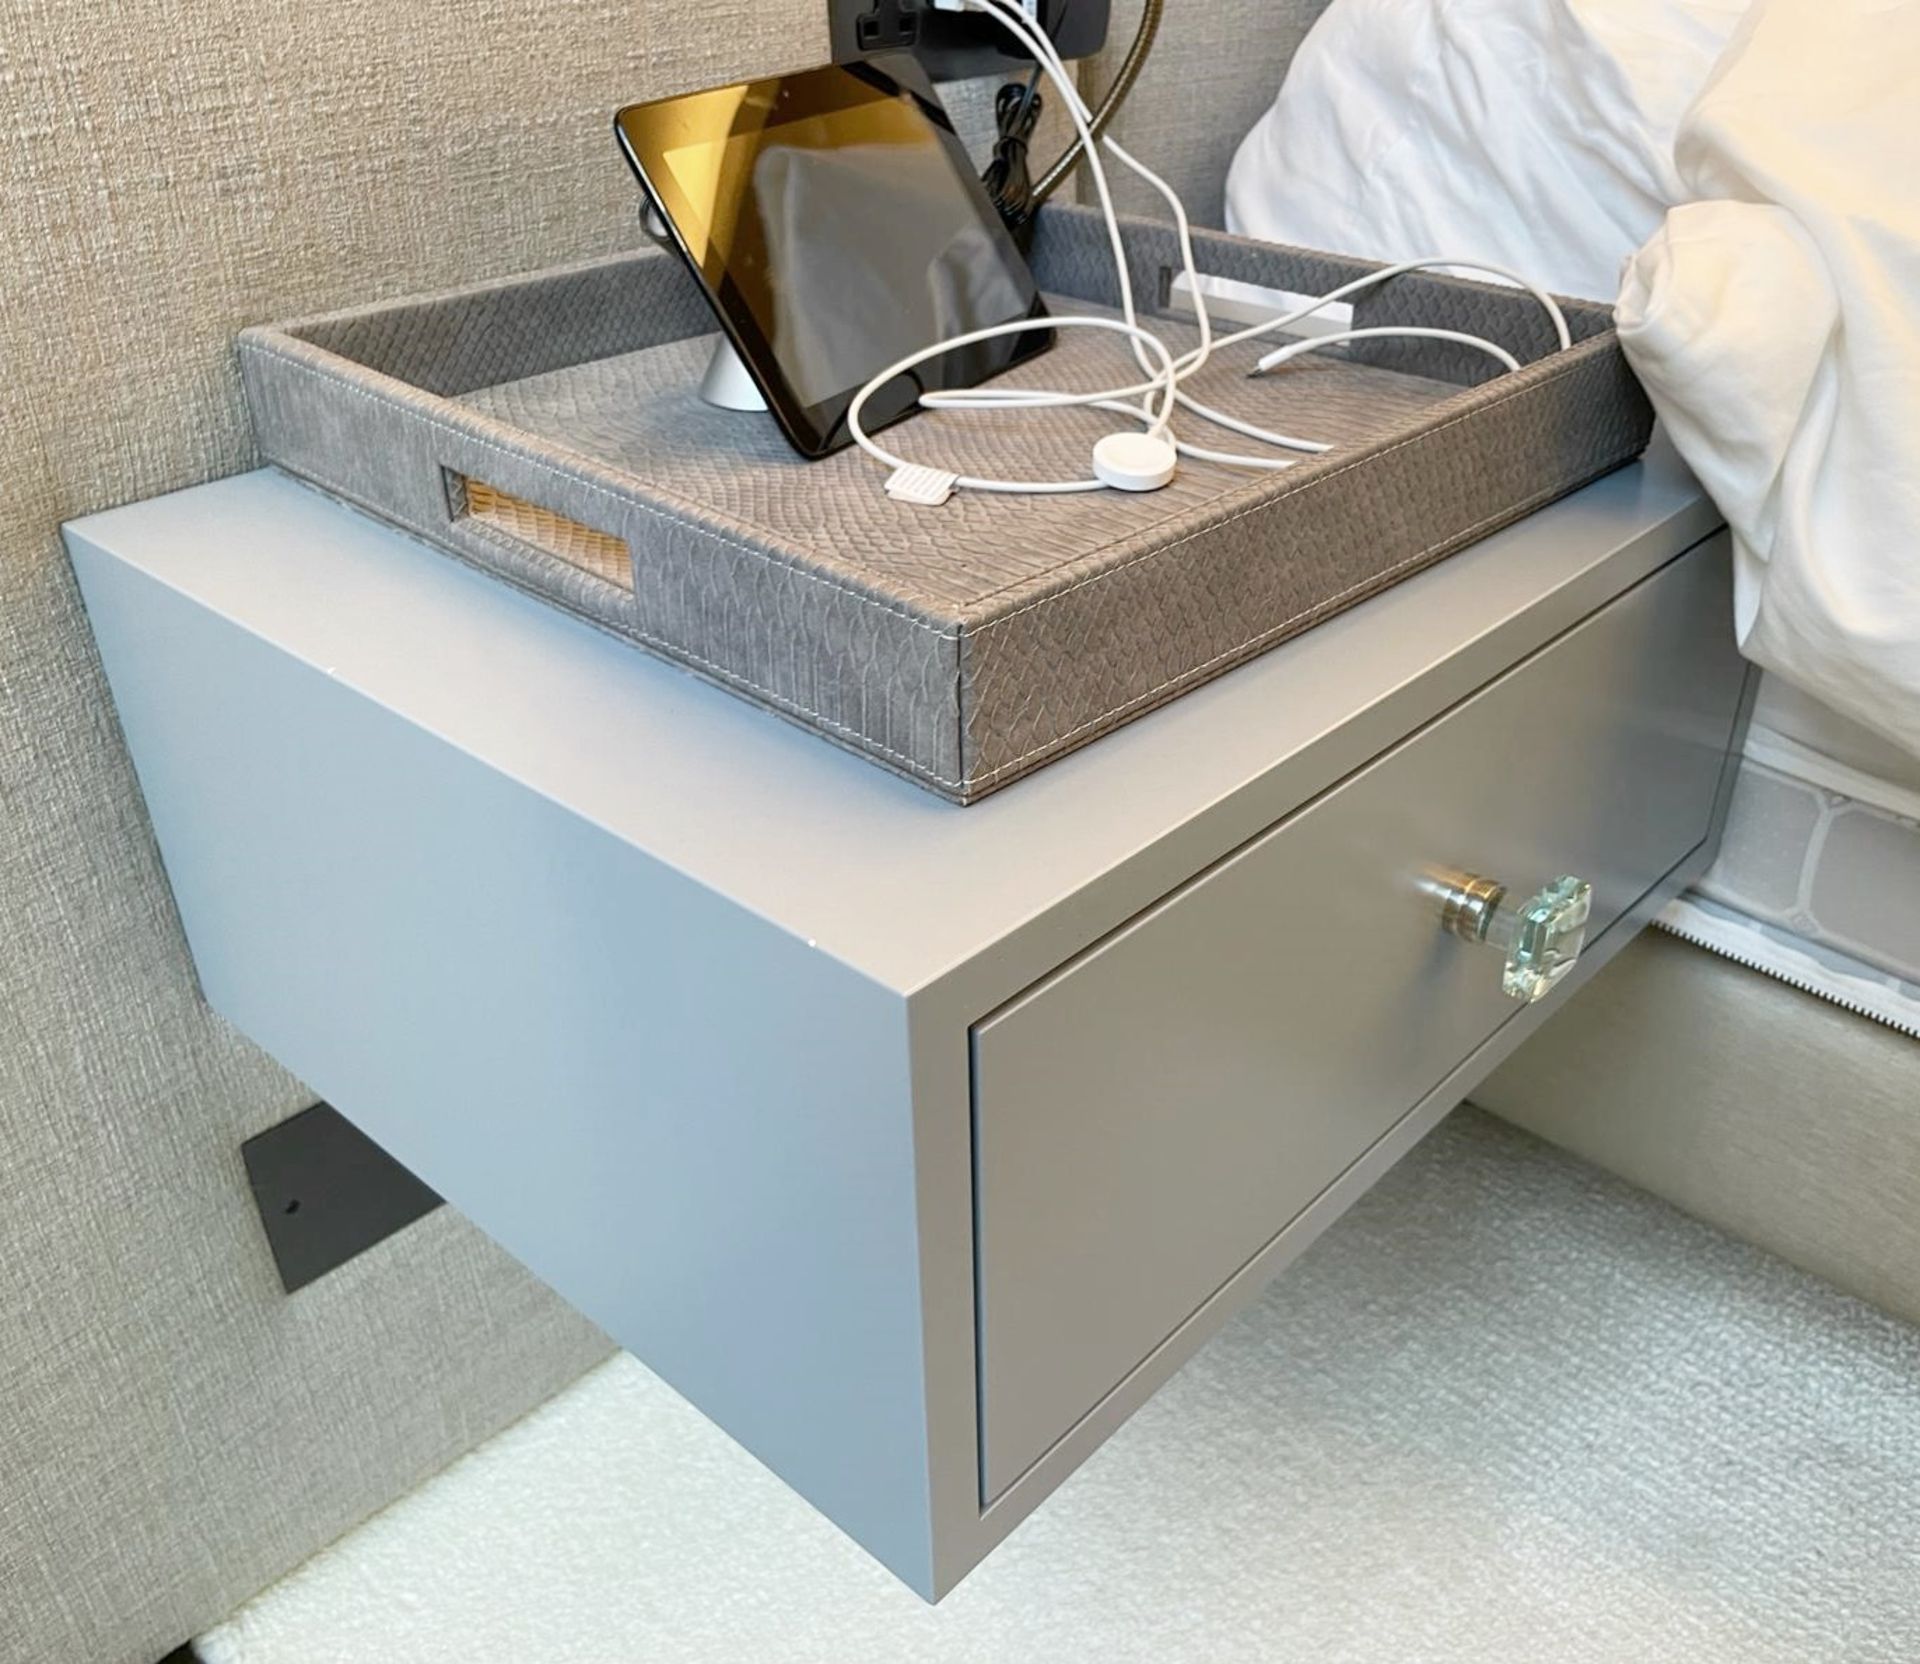 Pair of Stylish Wall Hung Bedside Drawers with a Grey Lacquer Finish and Glass Handles - Image 10 of 14